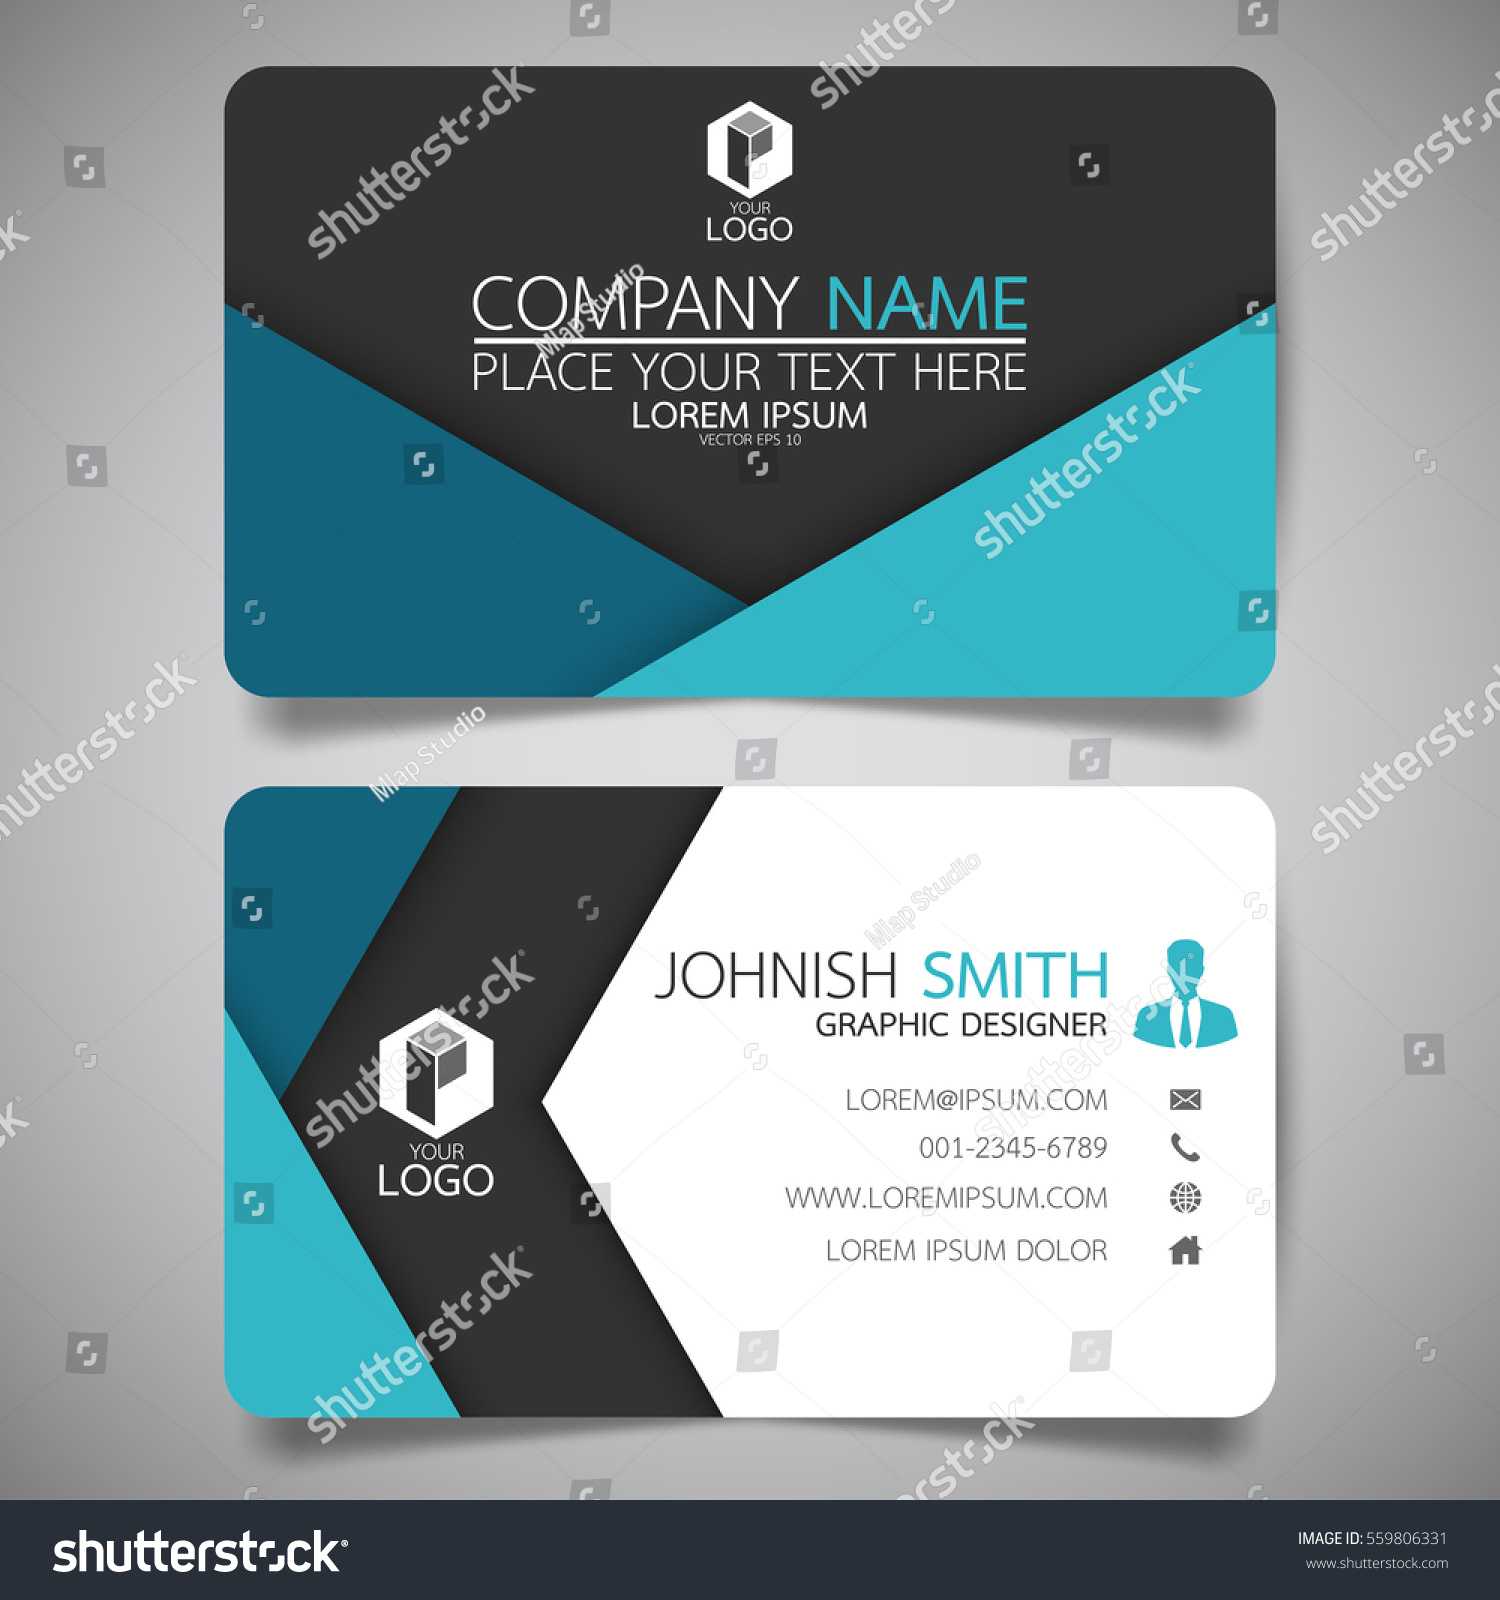 Blue Fold Modern Creative Business Card | Backgrounds With Fold Over Business Card Template